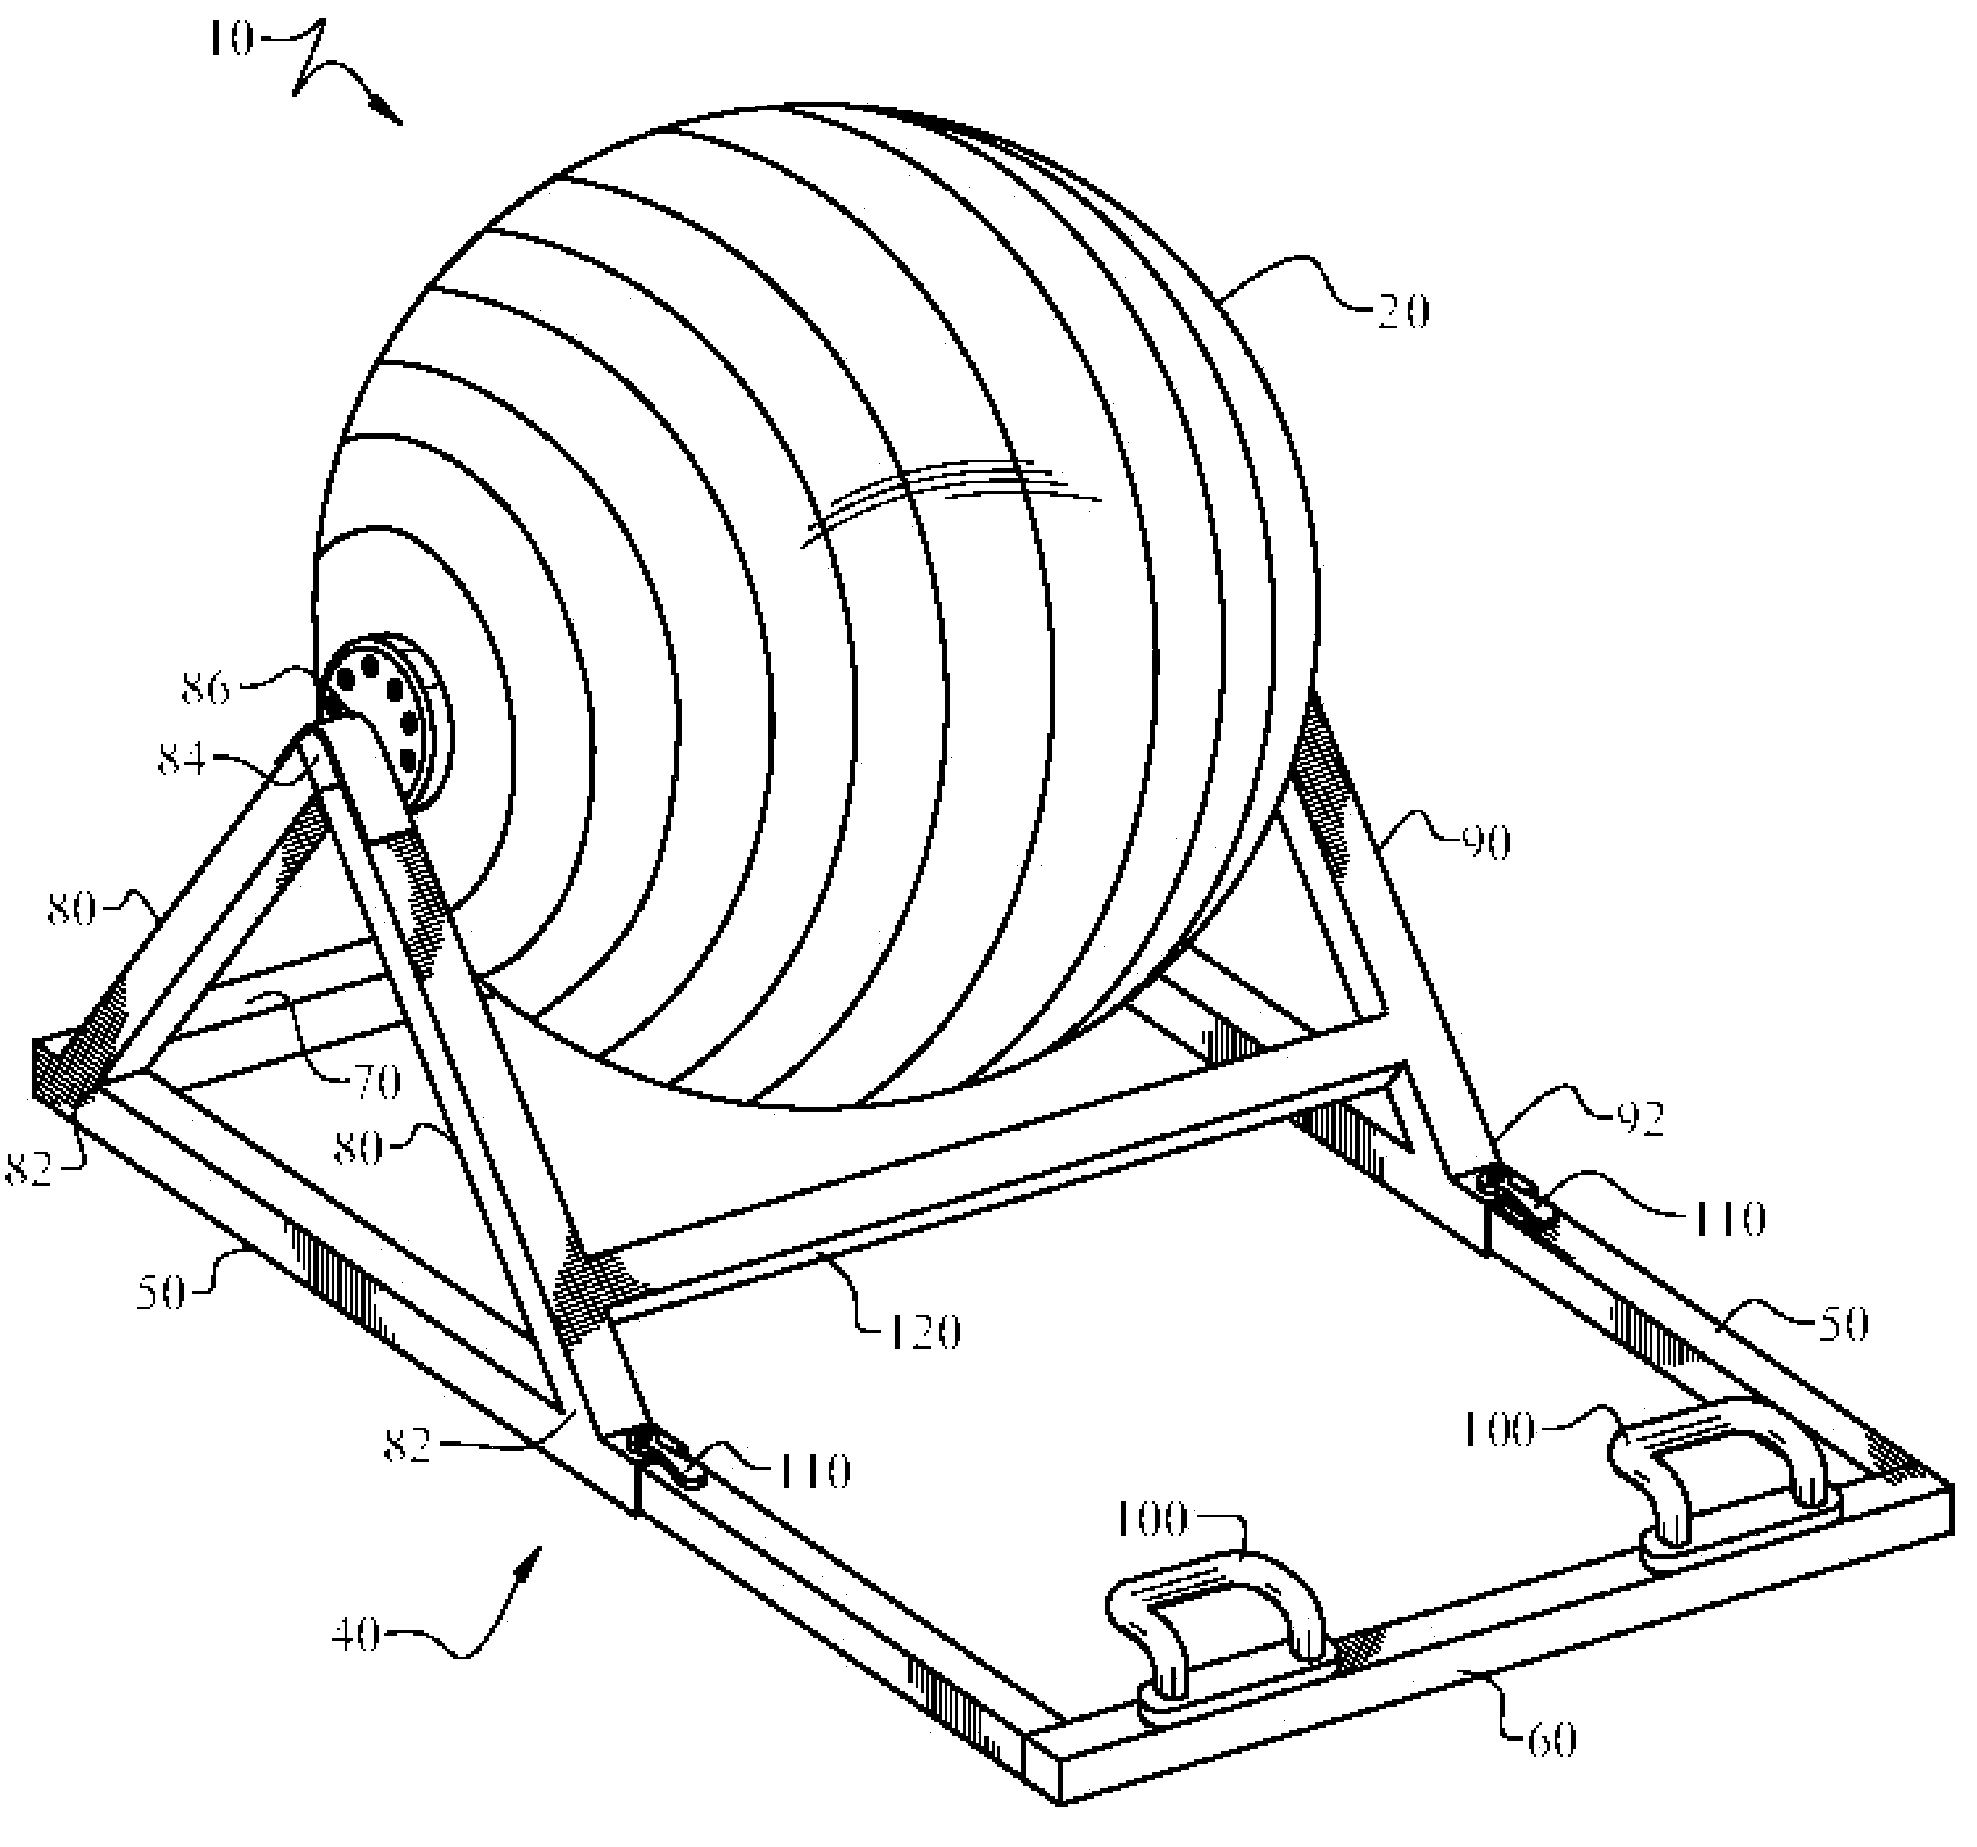 Exercise ball mounted for rotation